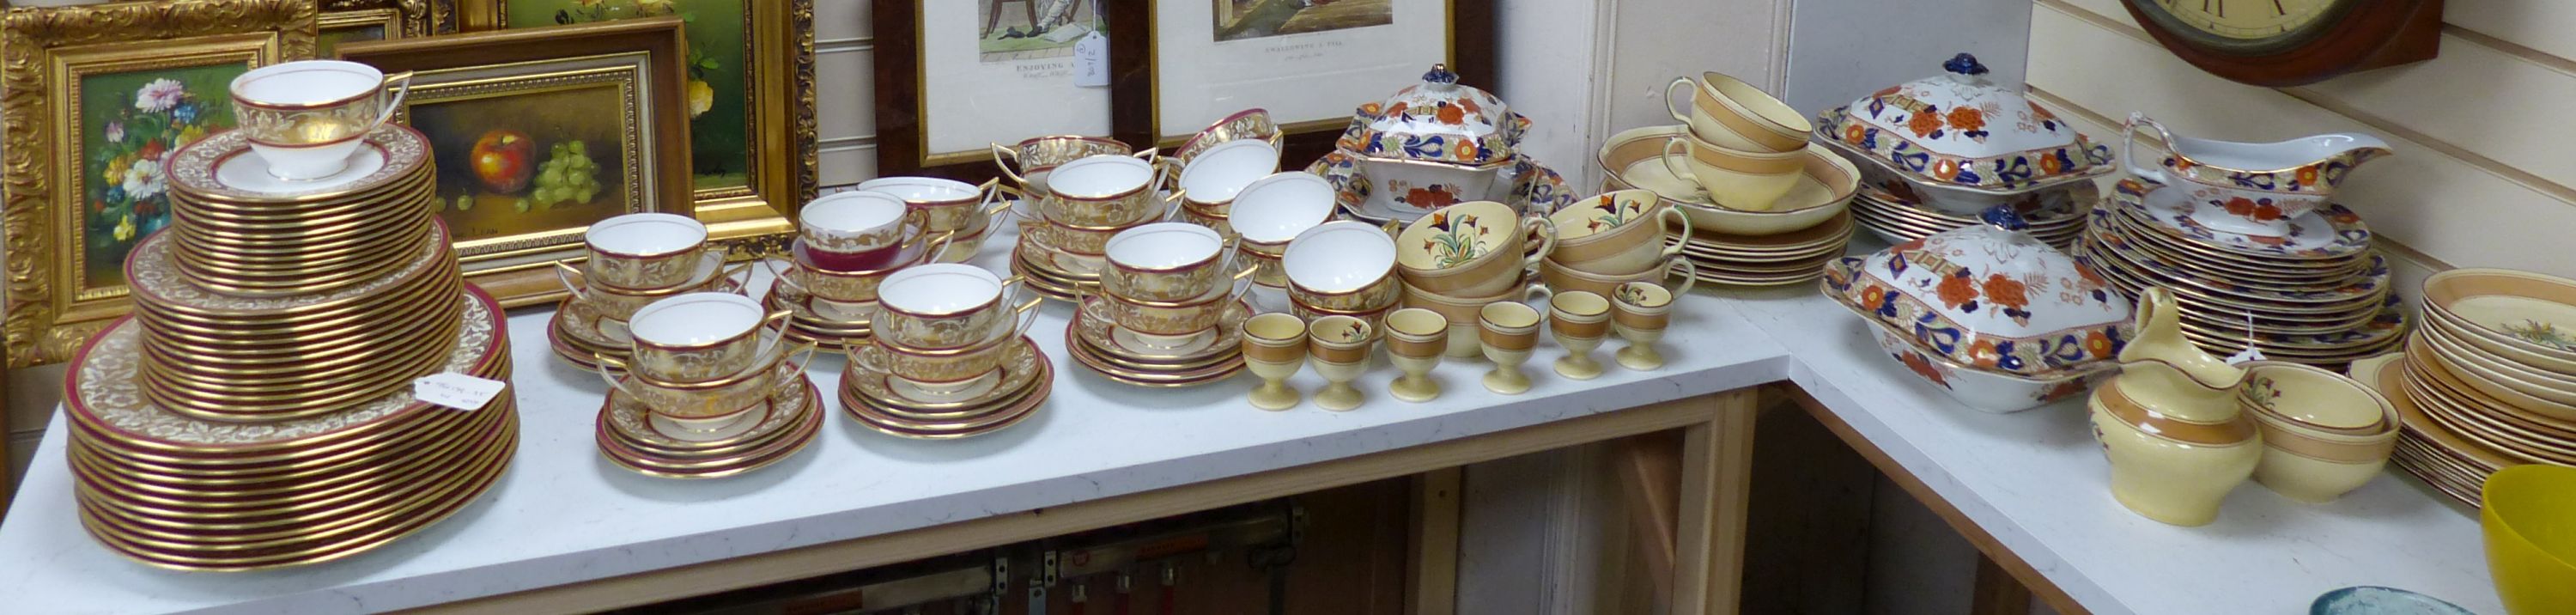 A Mintons breakfast set, a Minton part dinner service and a Woods floral-patterned part dinner service